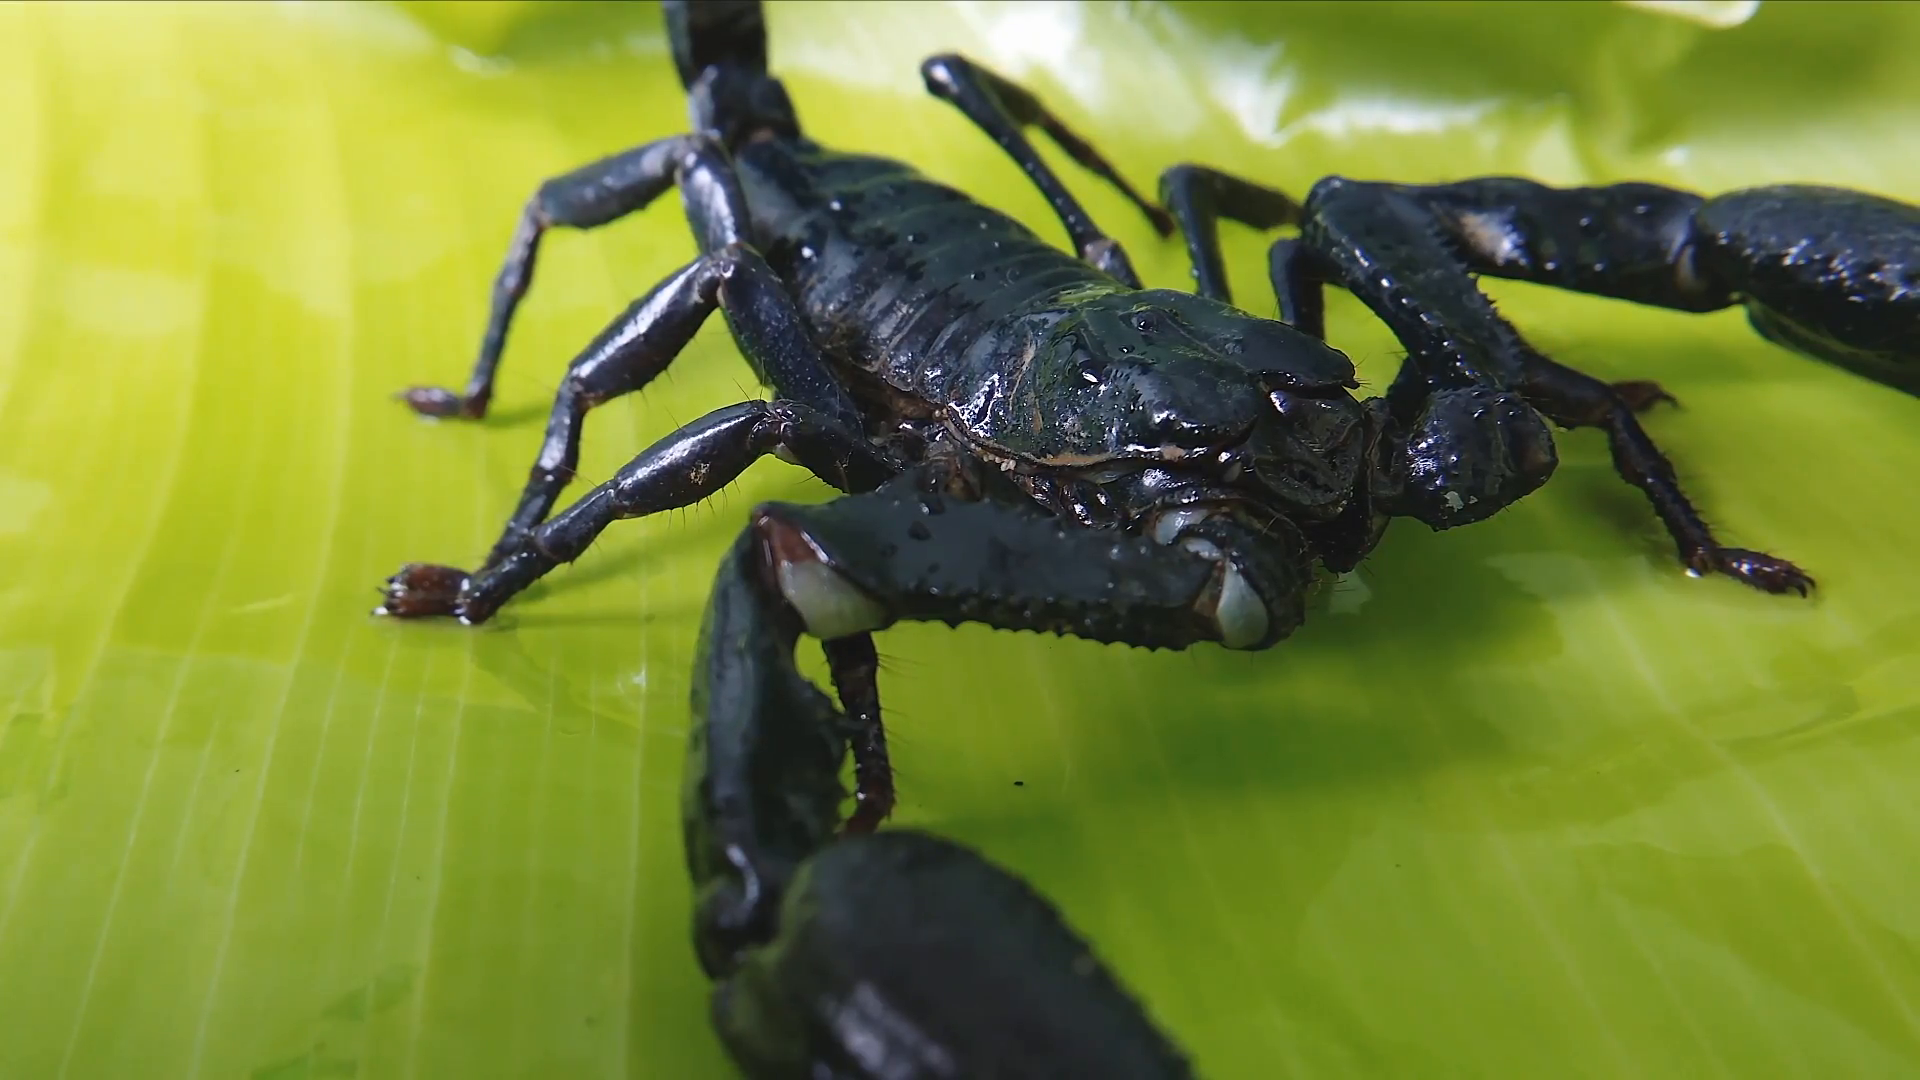 Creepy and scary black scorpion with deadly stinger and big claws ...